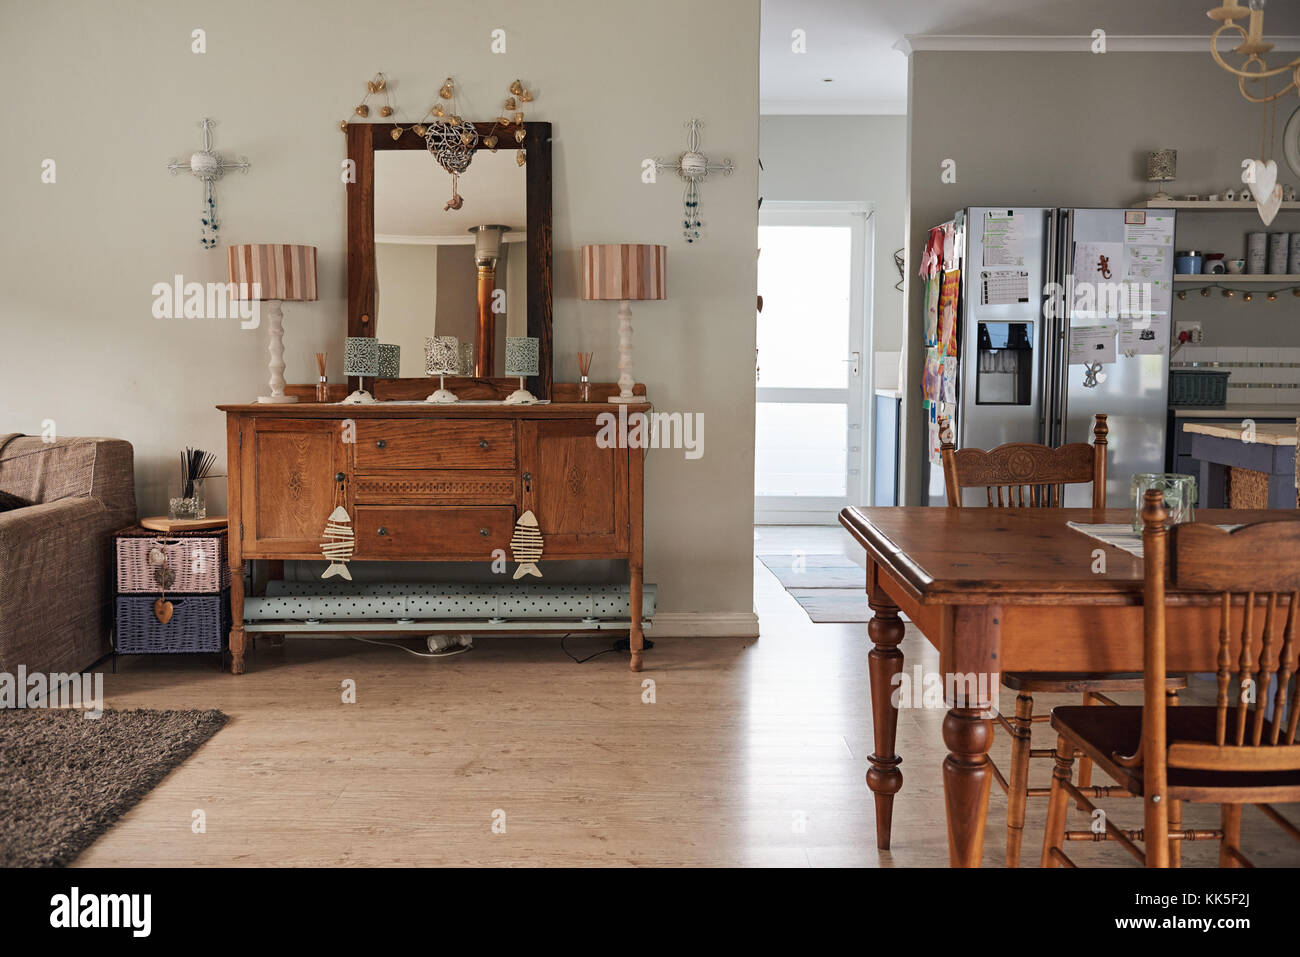 Interior of the dining and living areas of a home Stock Photo